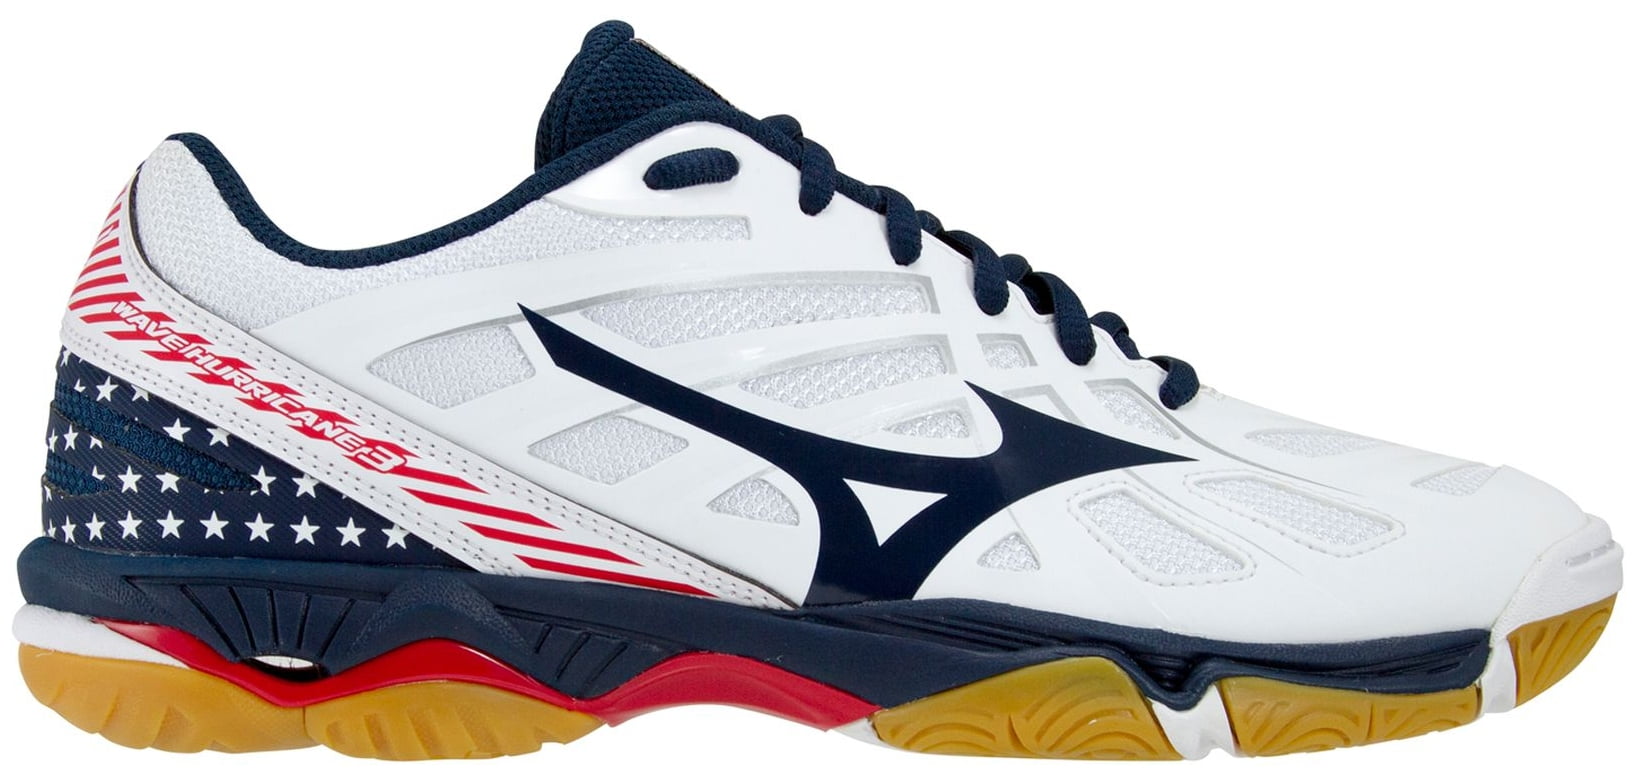 Mizuno Womens Wave Hurricane WOS Volleyball Shoes